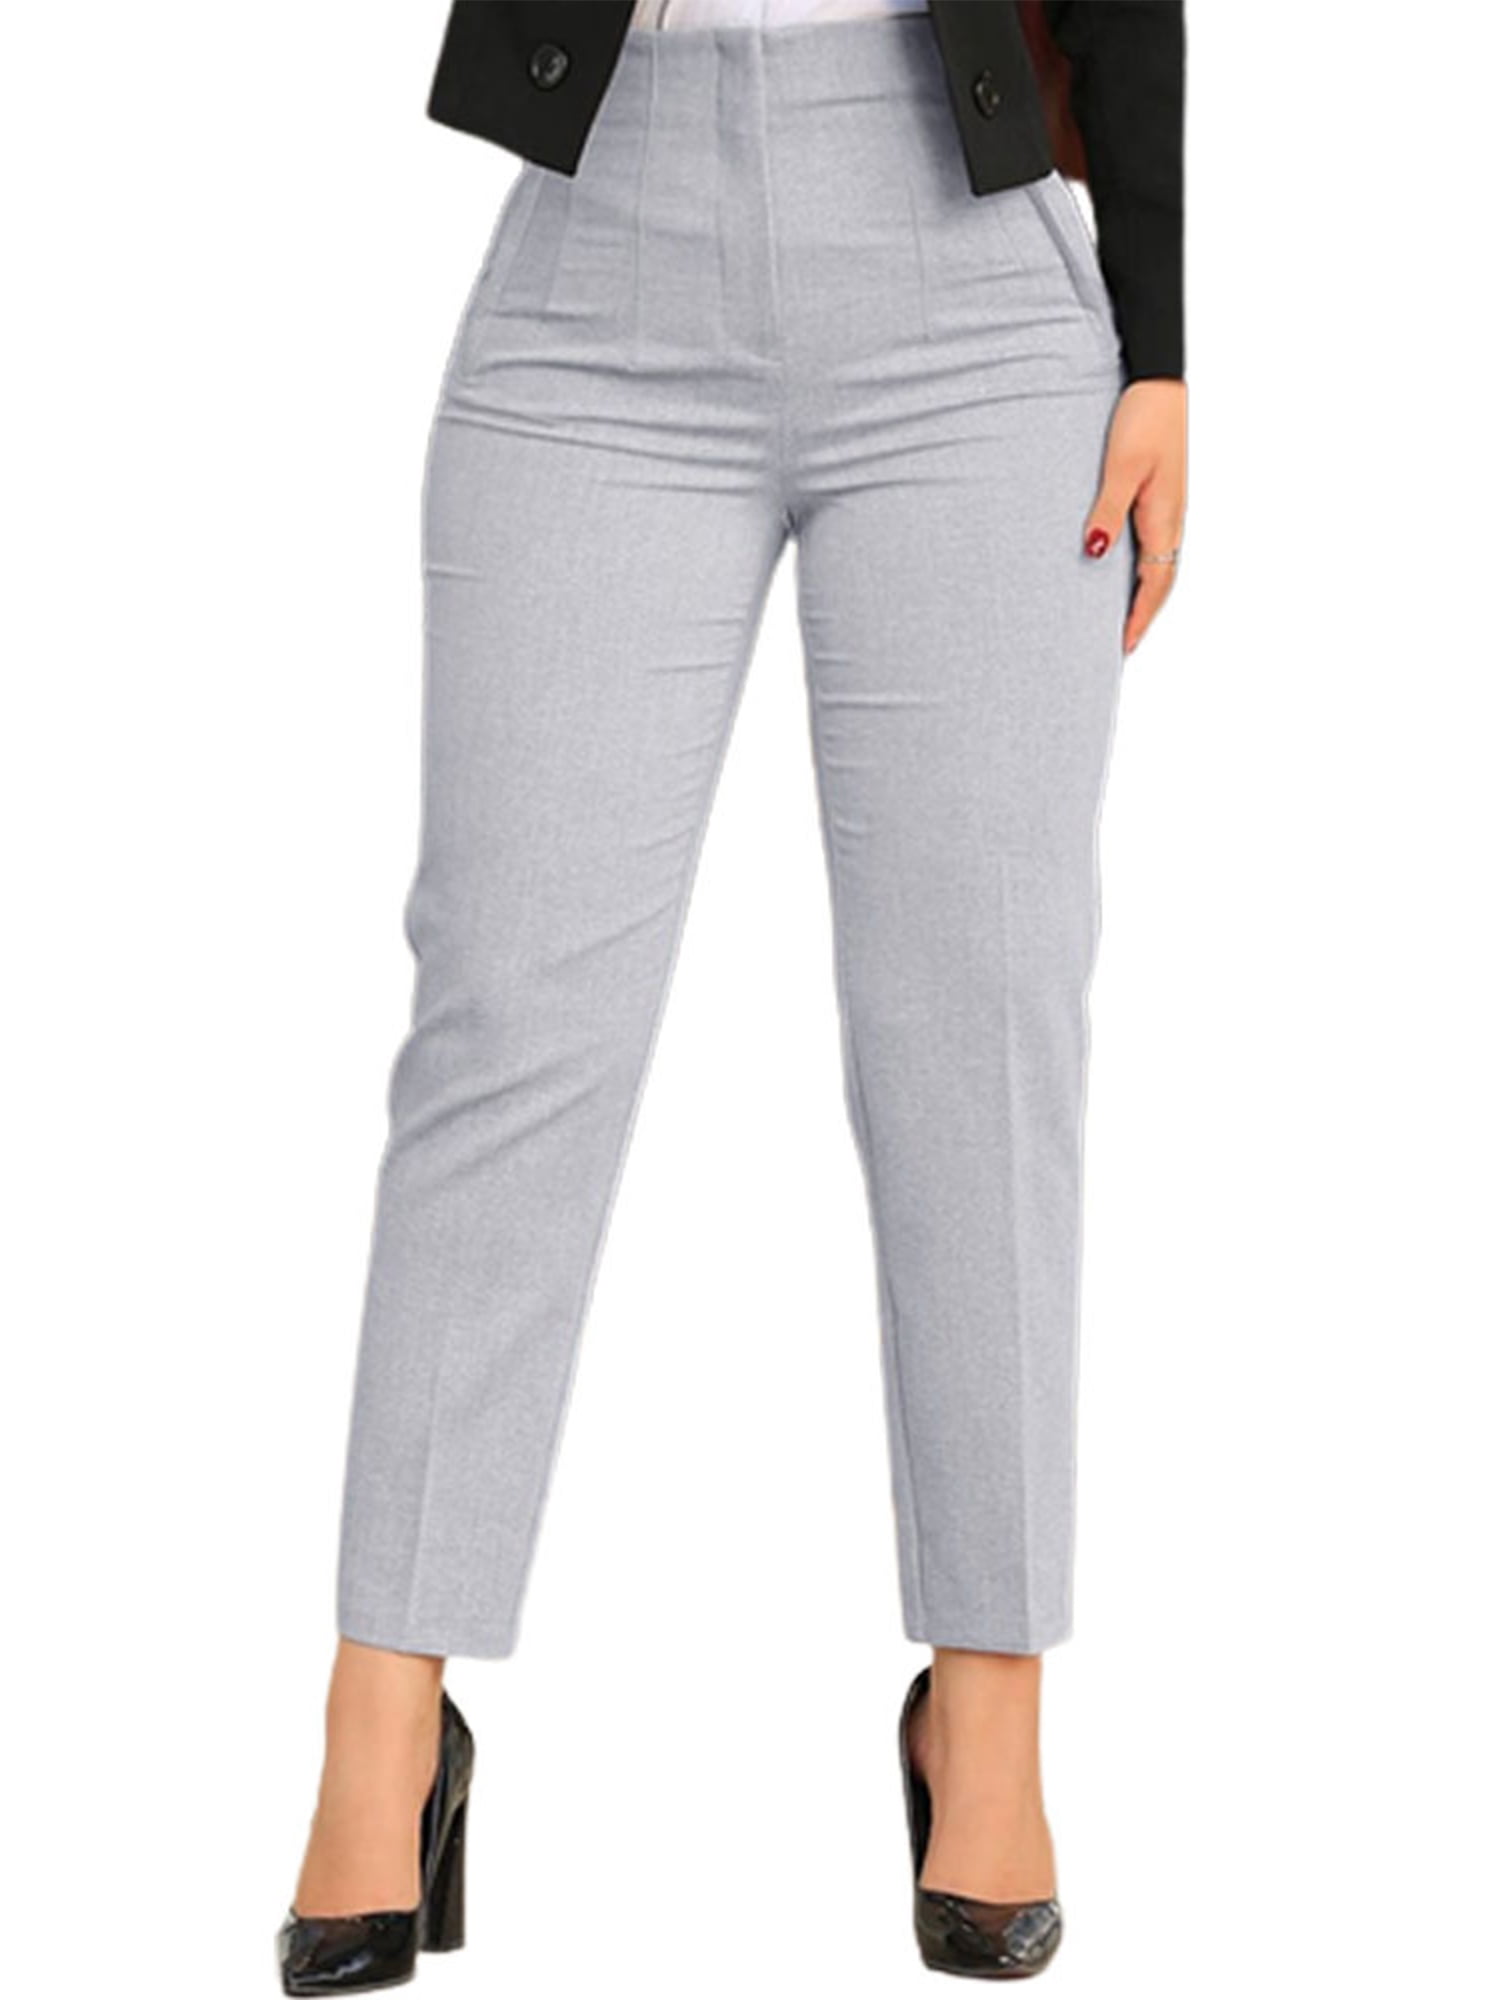 Women's Office Work Pants High Waisted Business Casual Pants for